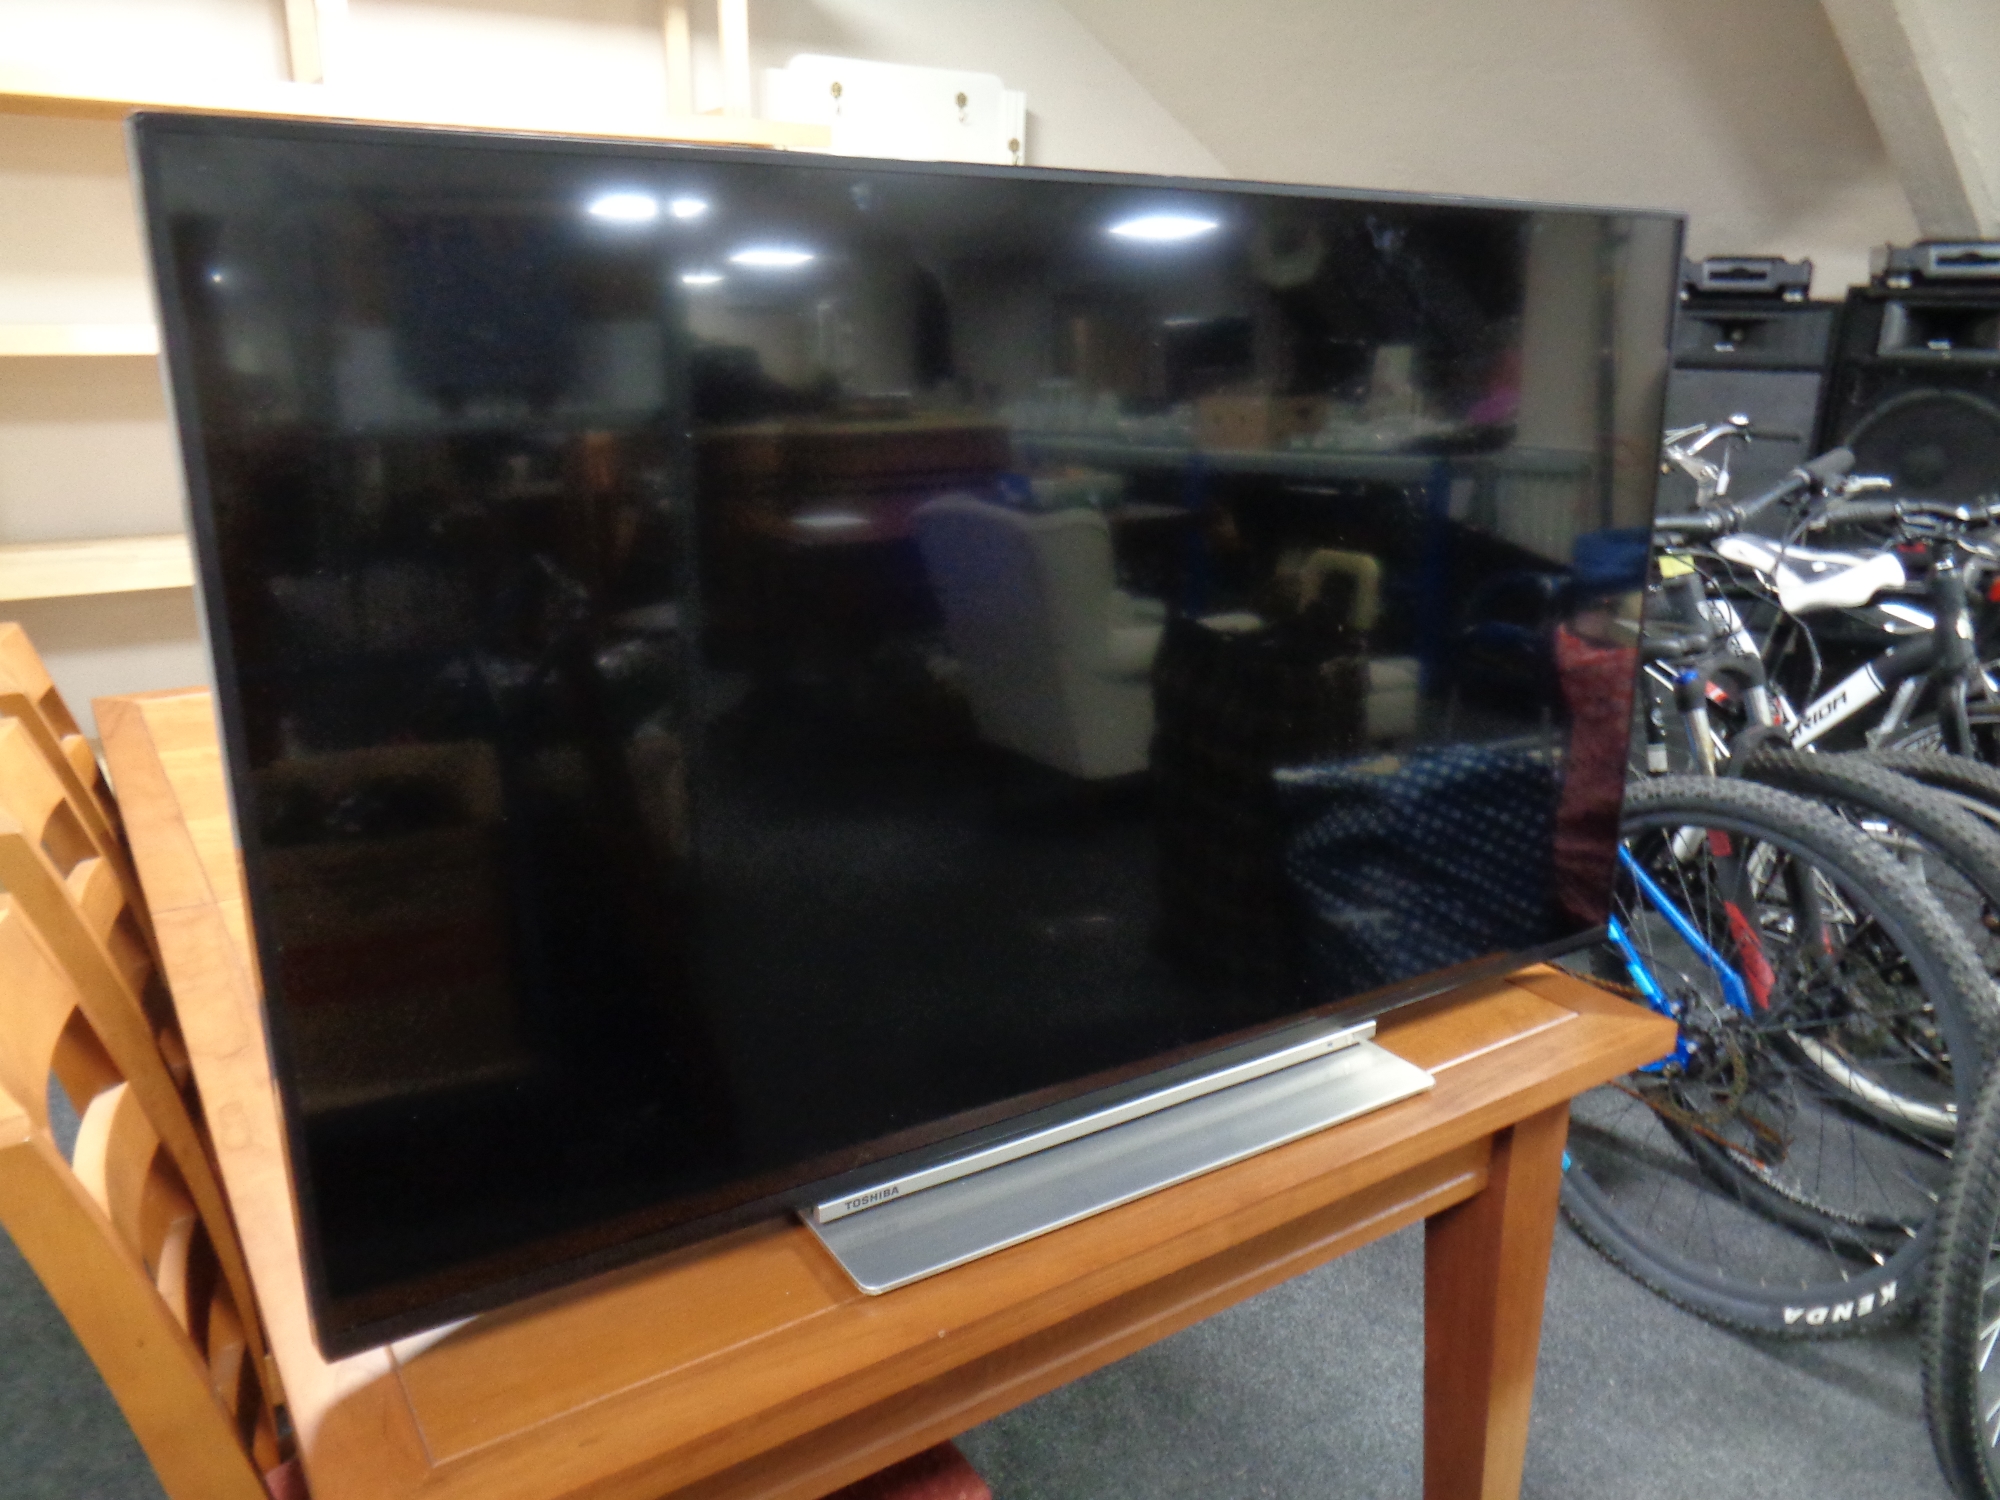 A Toshiba 43" LCD TV with remote